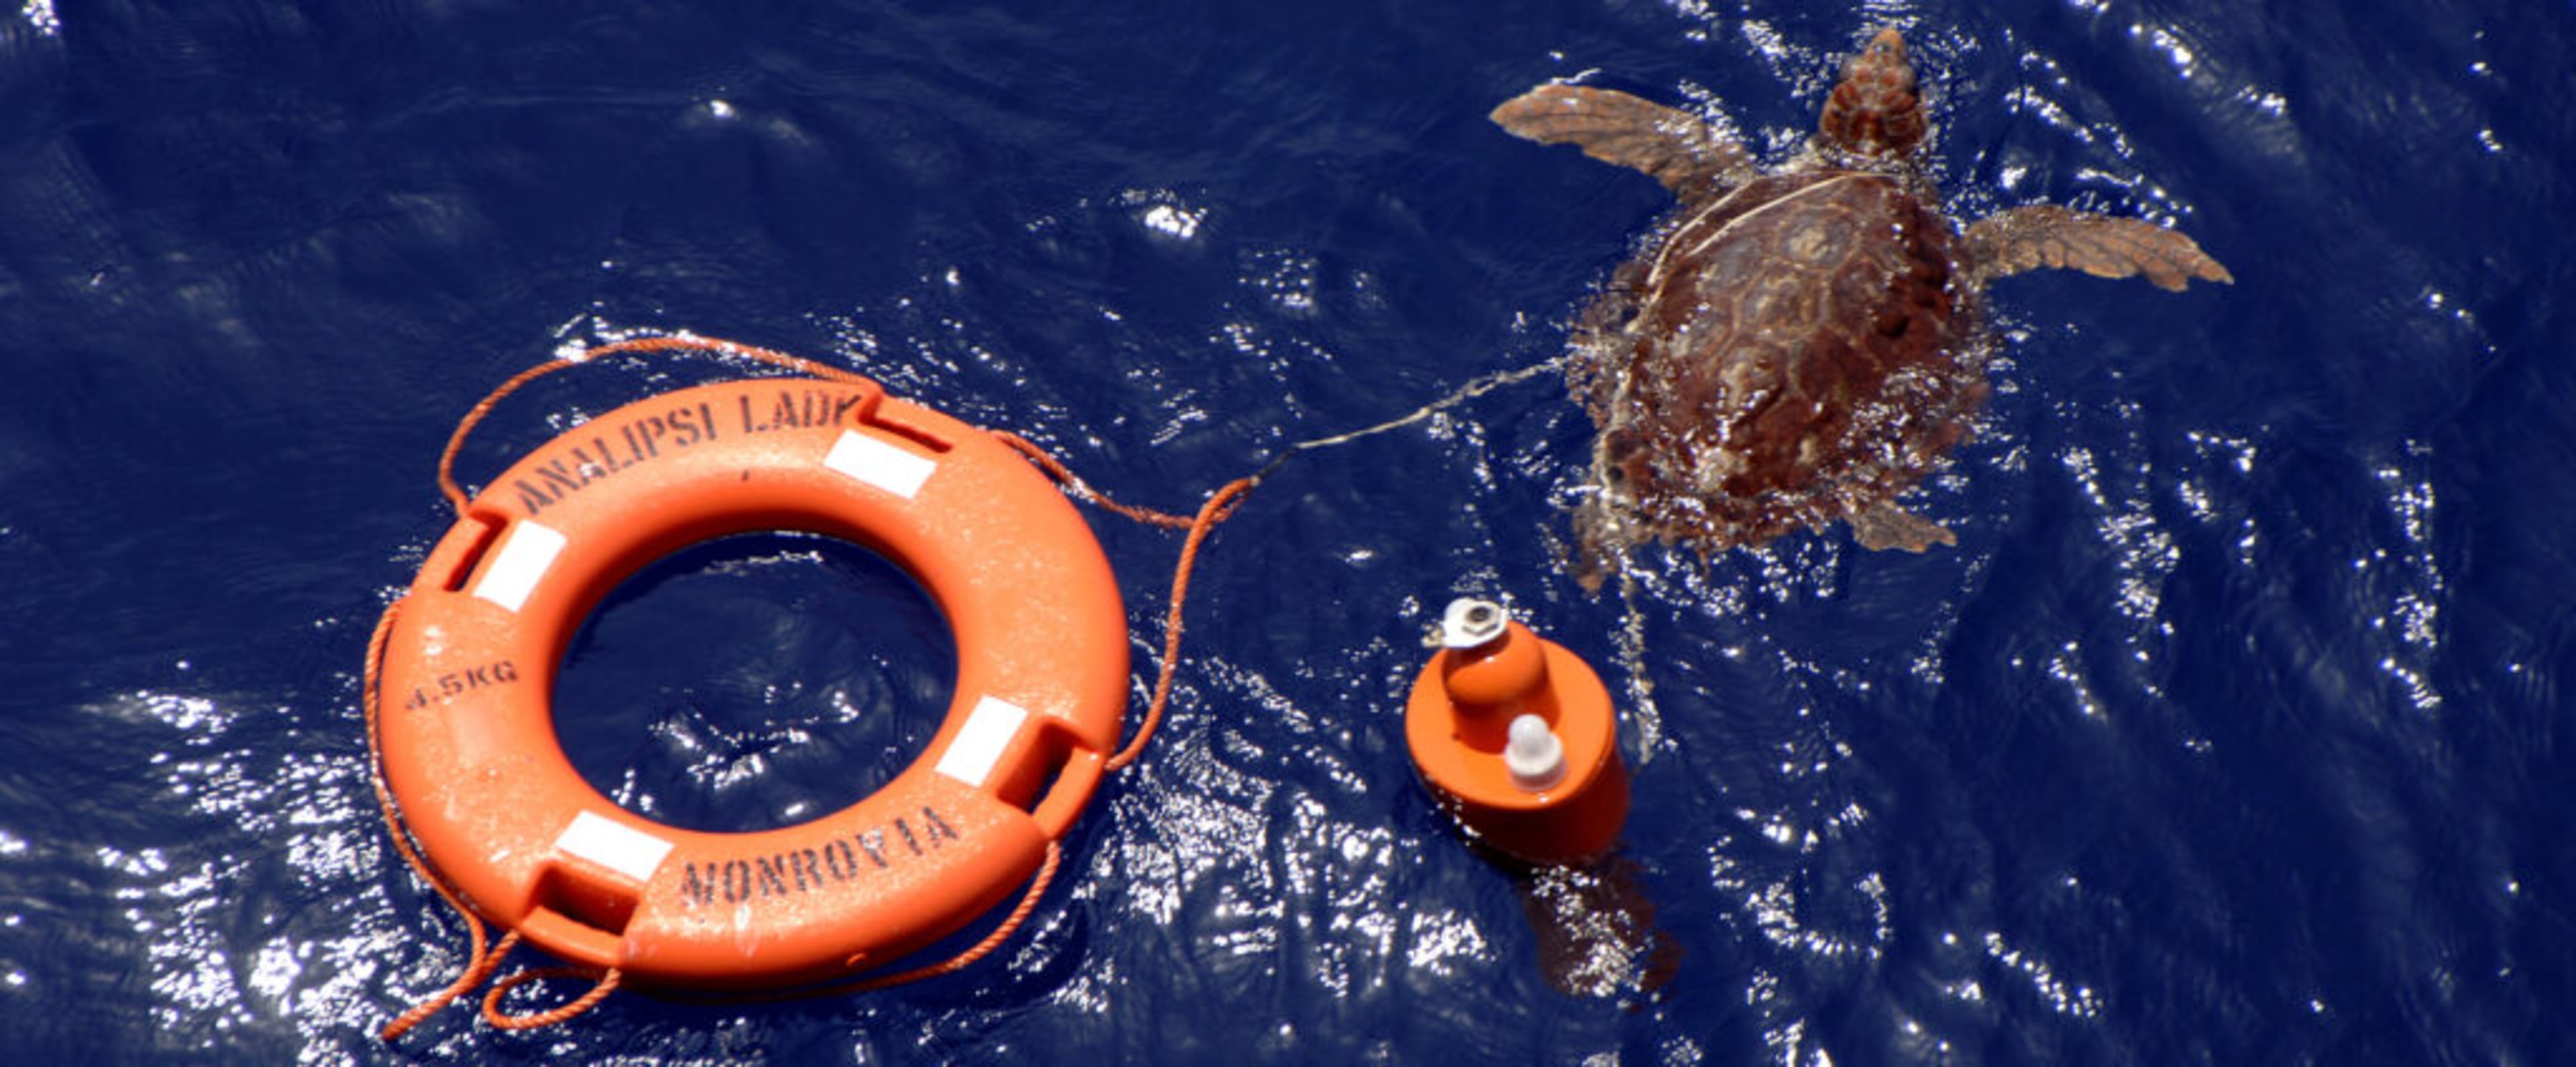 Turtle swimming close to a life preserver as a metaphor for developers using Git version management to stay afloat